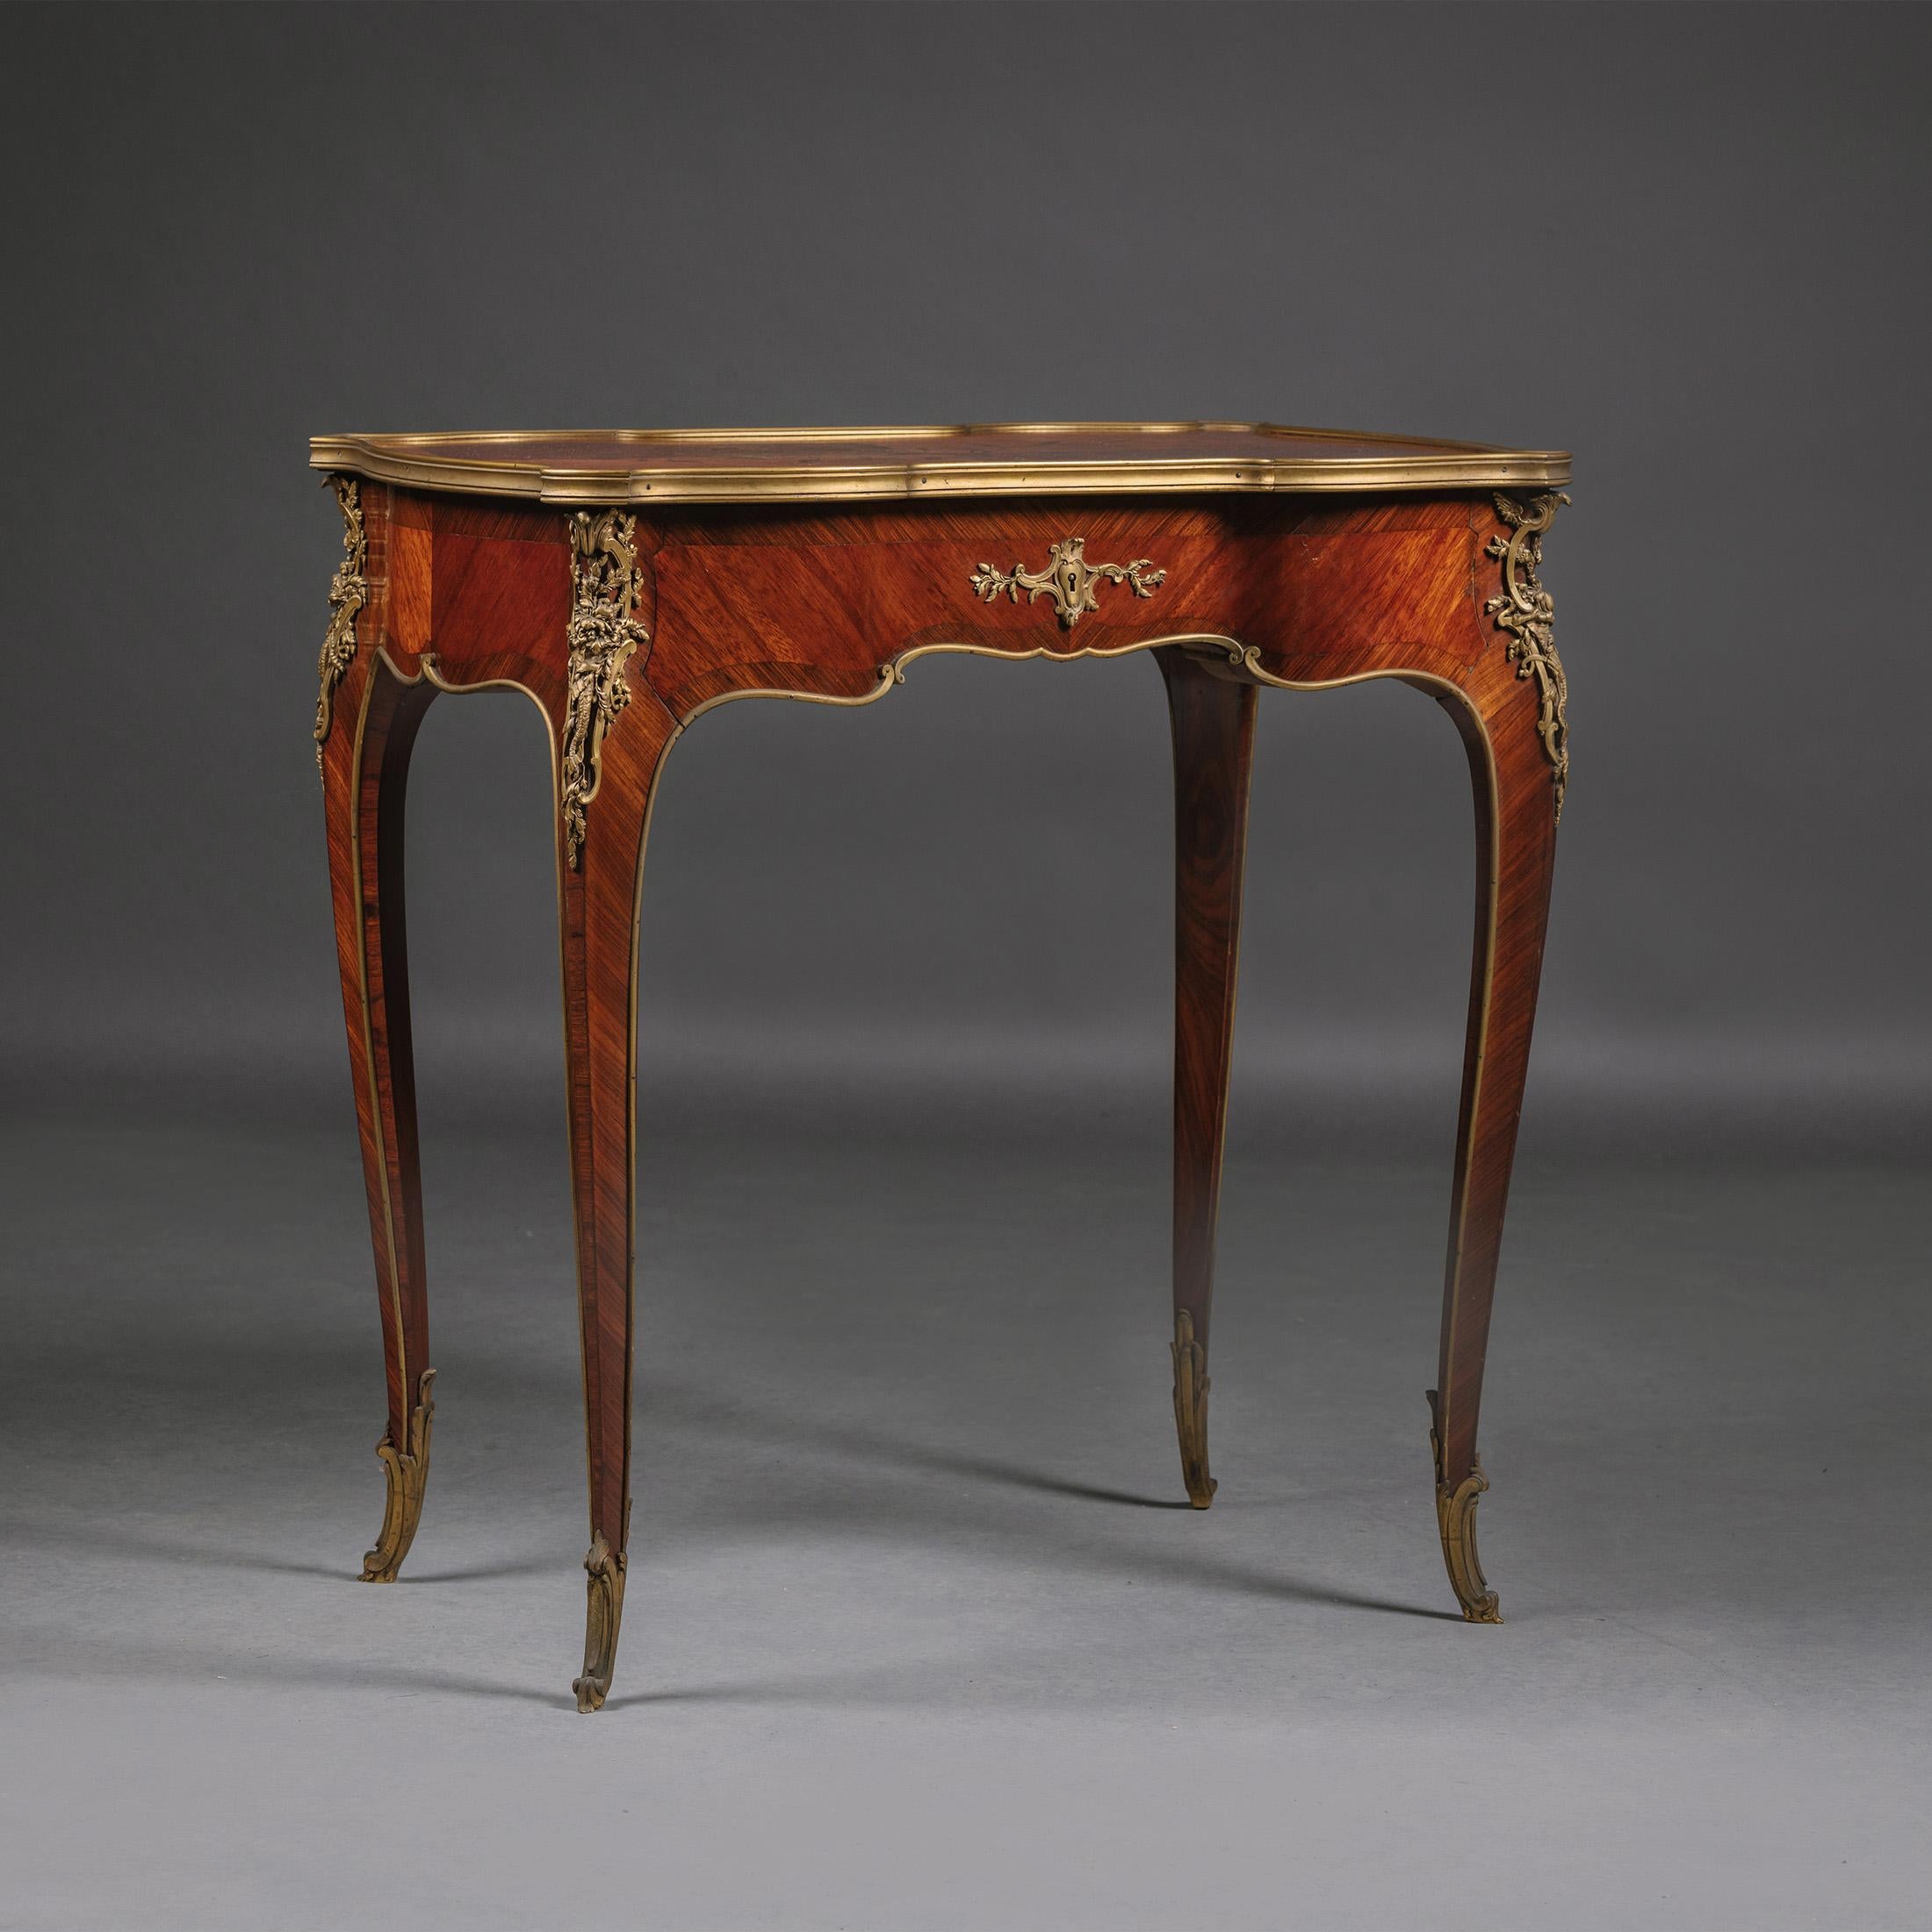 A Gilt-Bronze Marquetry Inlaid Occasional Table, Attributed to Emmanuel Zwiener.

The reverse of the gilt-bronze sabot incised 'Z'

This exquisite table is perfect for a living room or bedroom. It can be used as a small writing or occasional, side